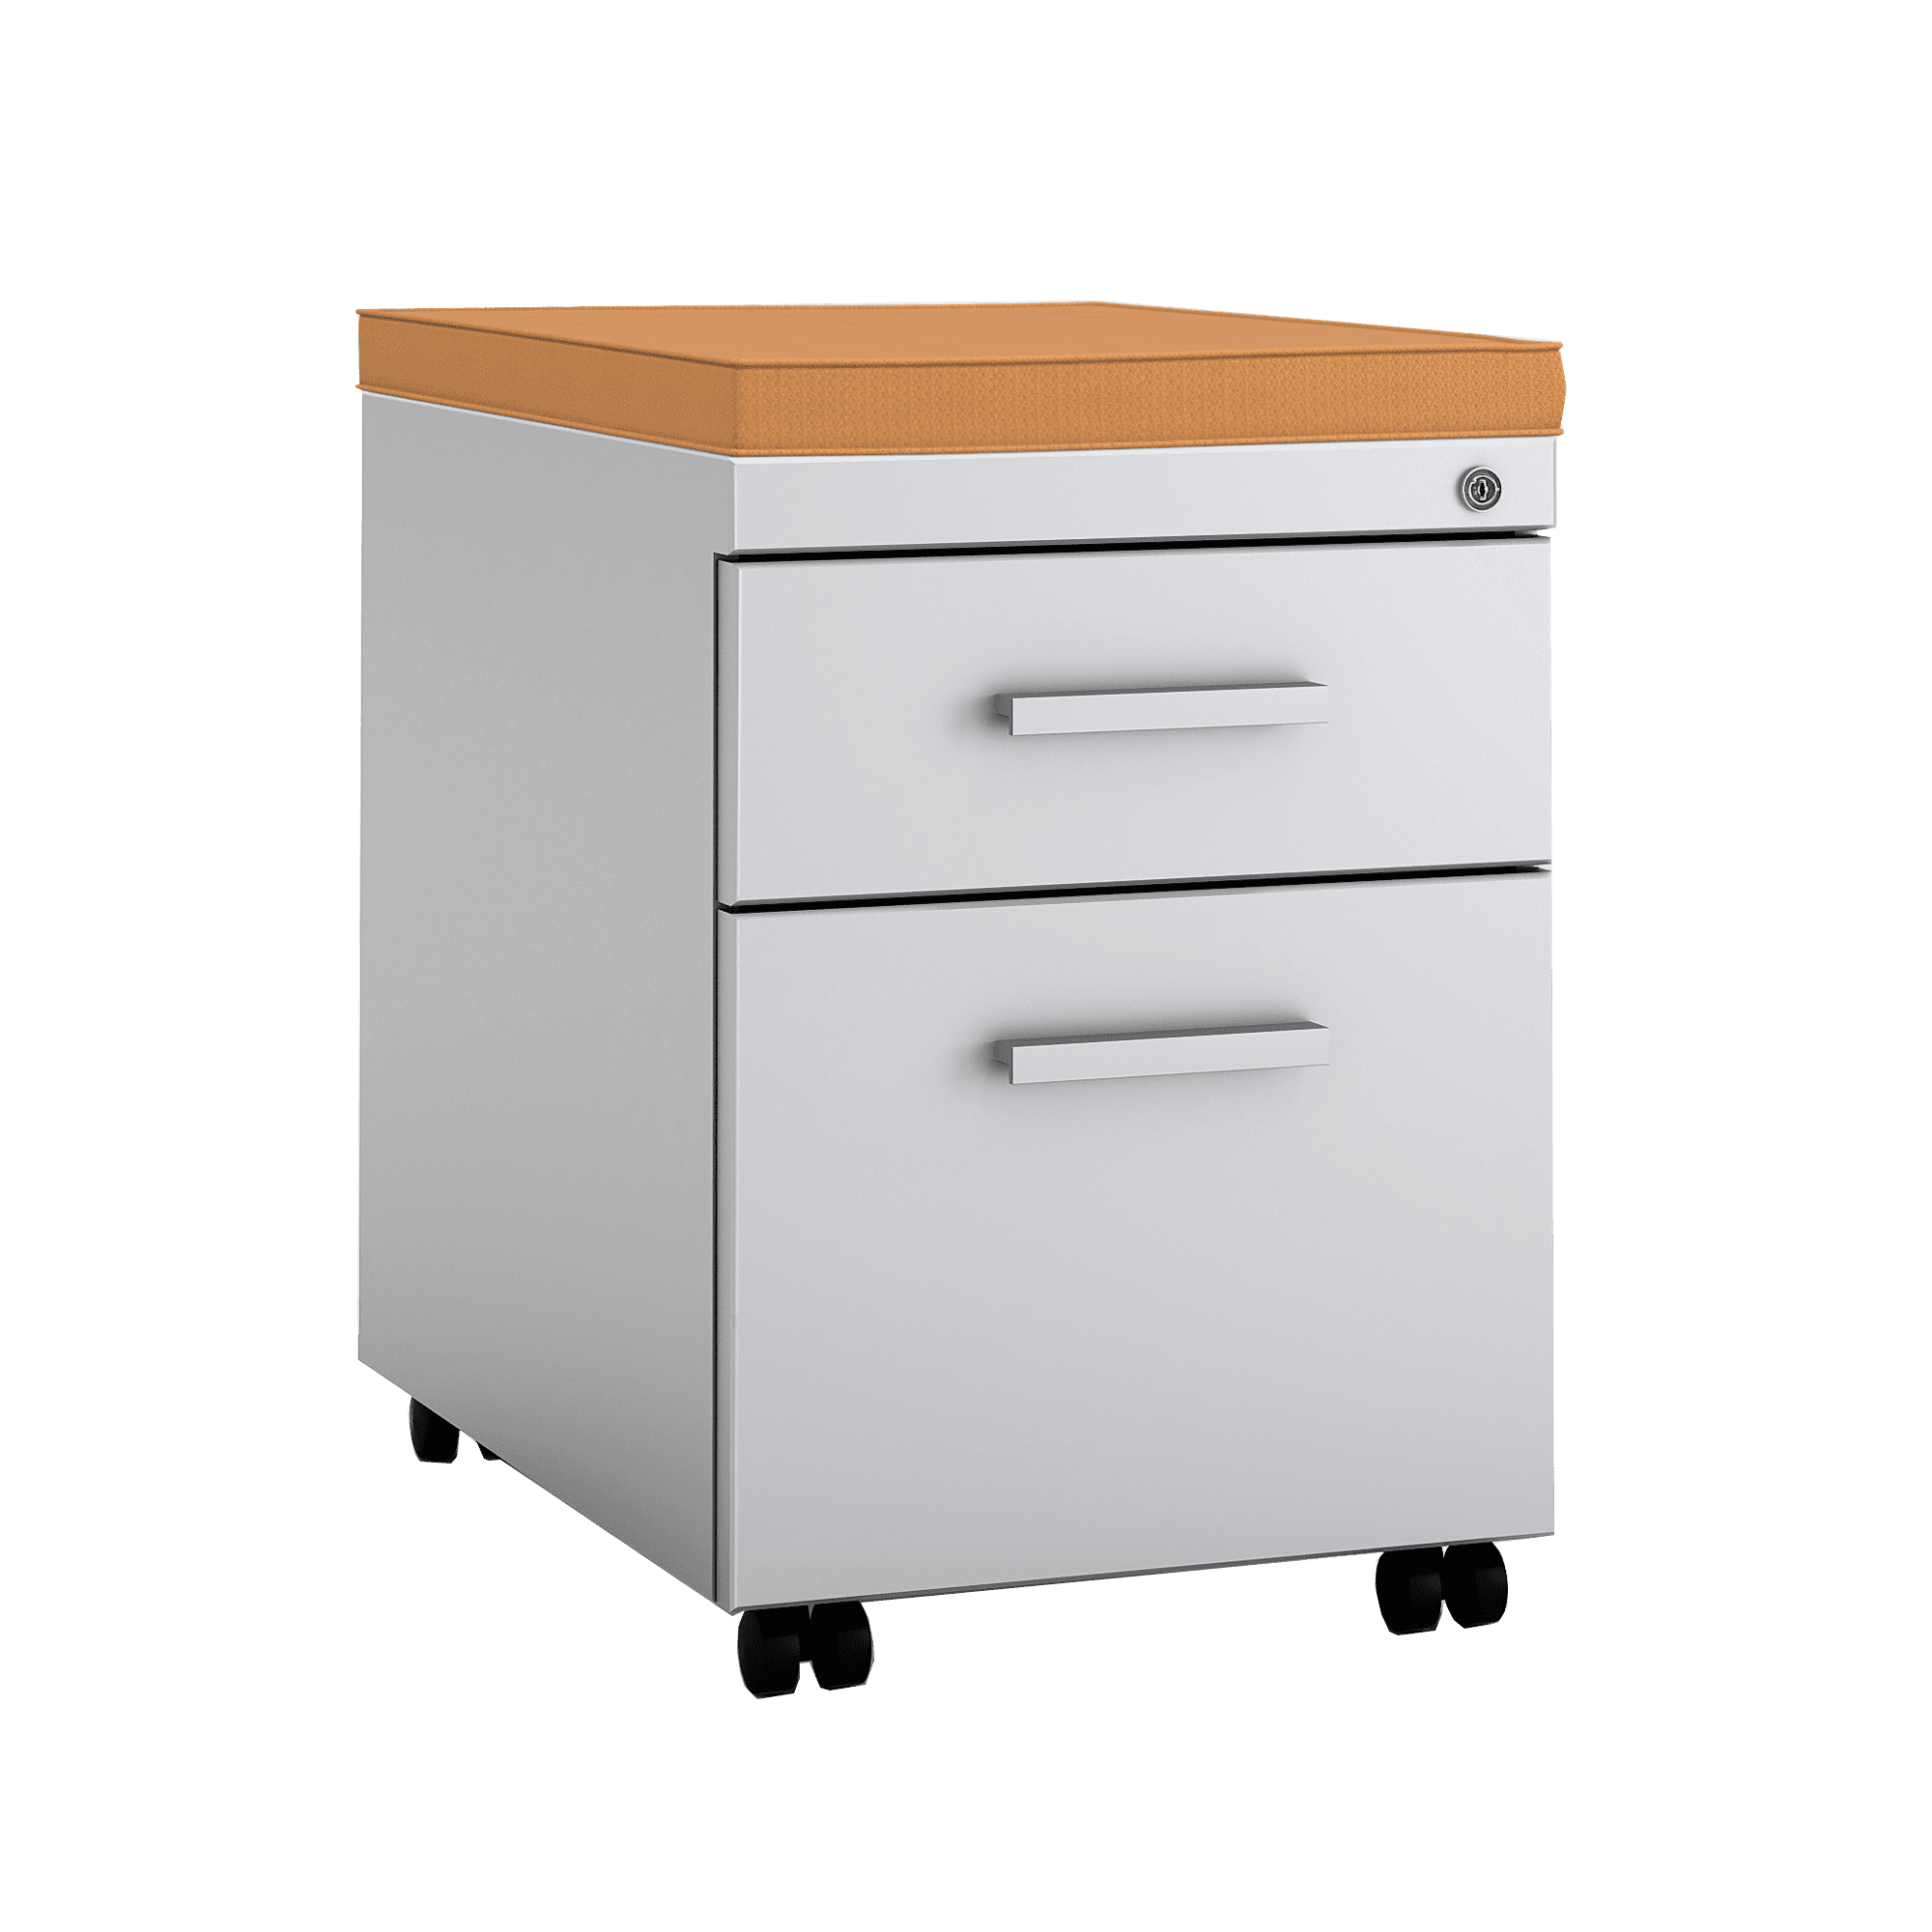 Details about   TS SERIES 2 DRAWER LOCKABLE MOBILE PEDESTAL FILE CABINET WITH CUSHION TOP 